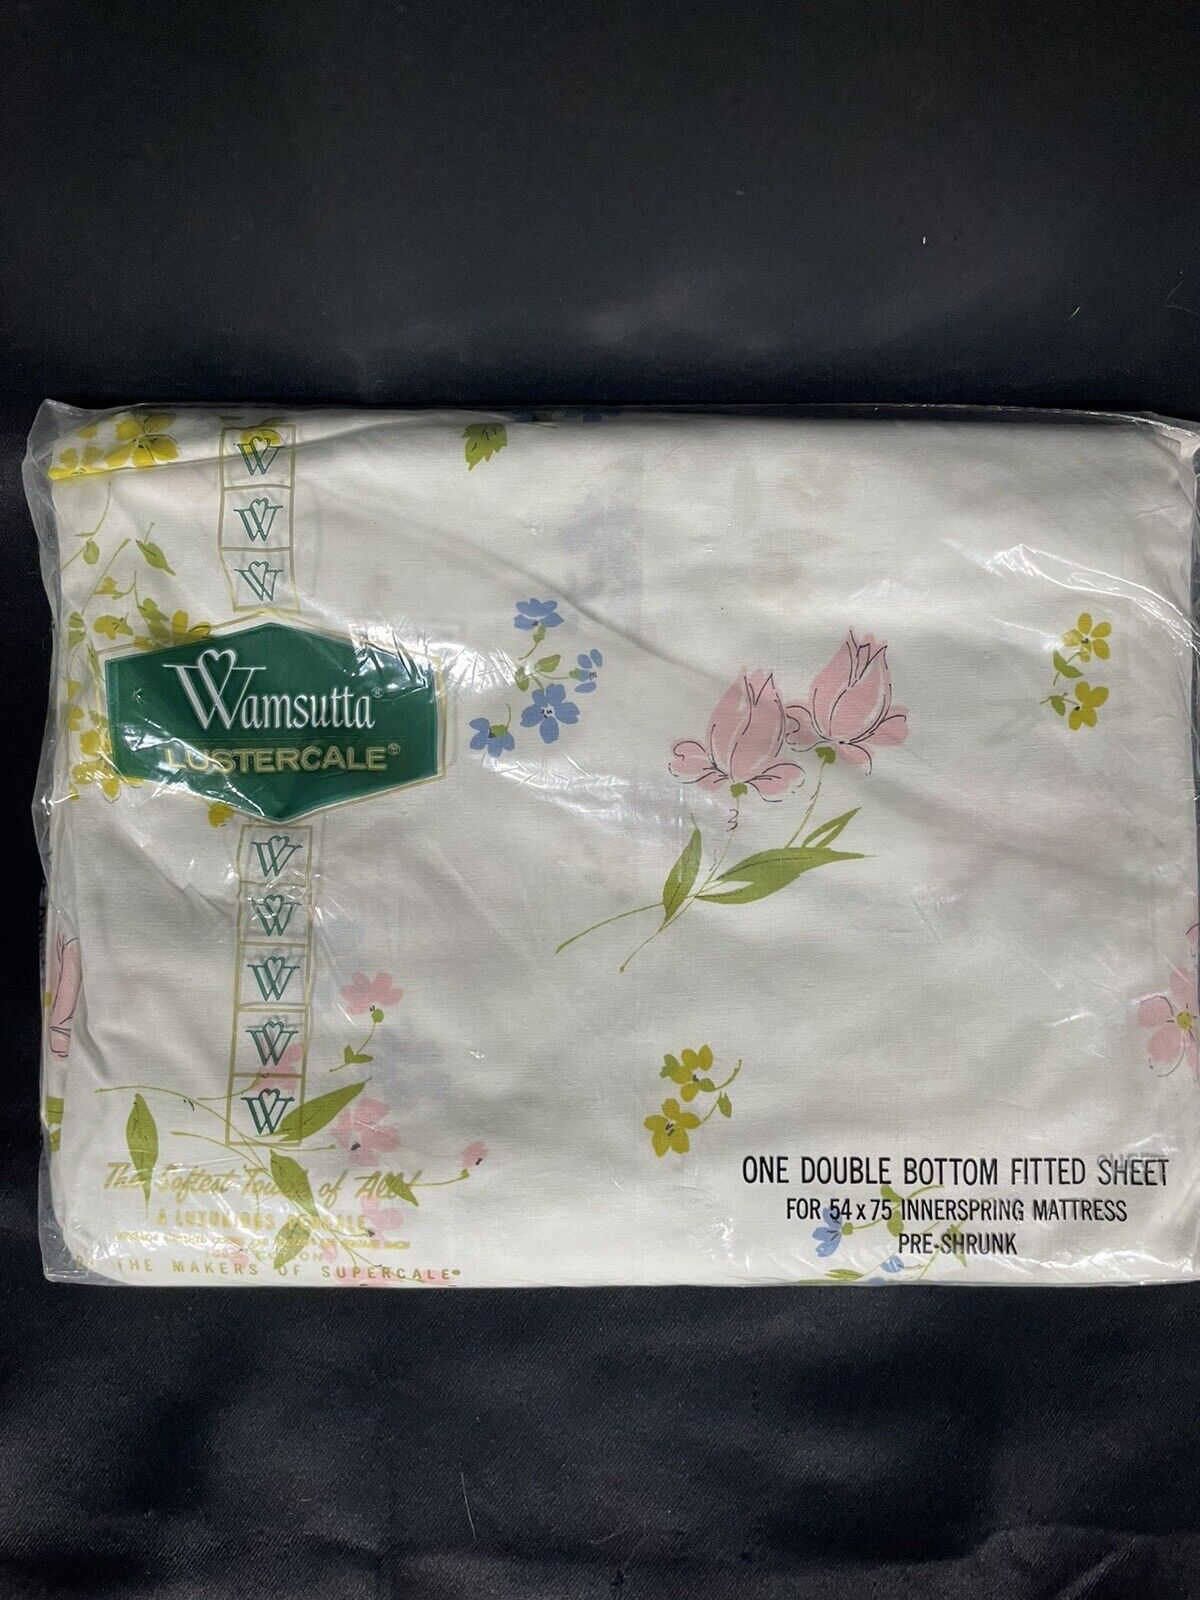 Vintage Wamsutta Lustercale One Double Bottom Fitted Sheet Brand New